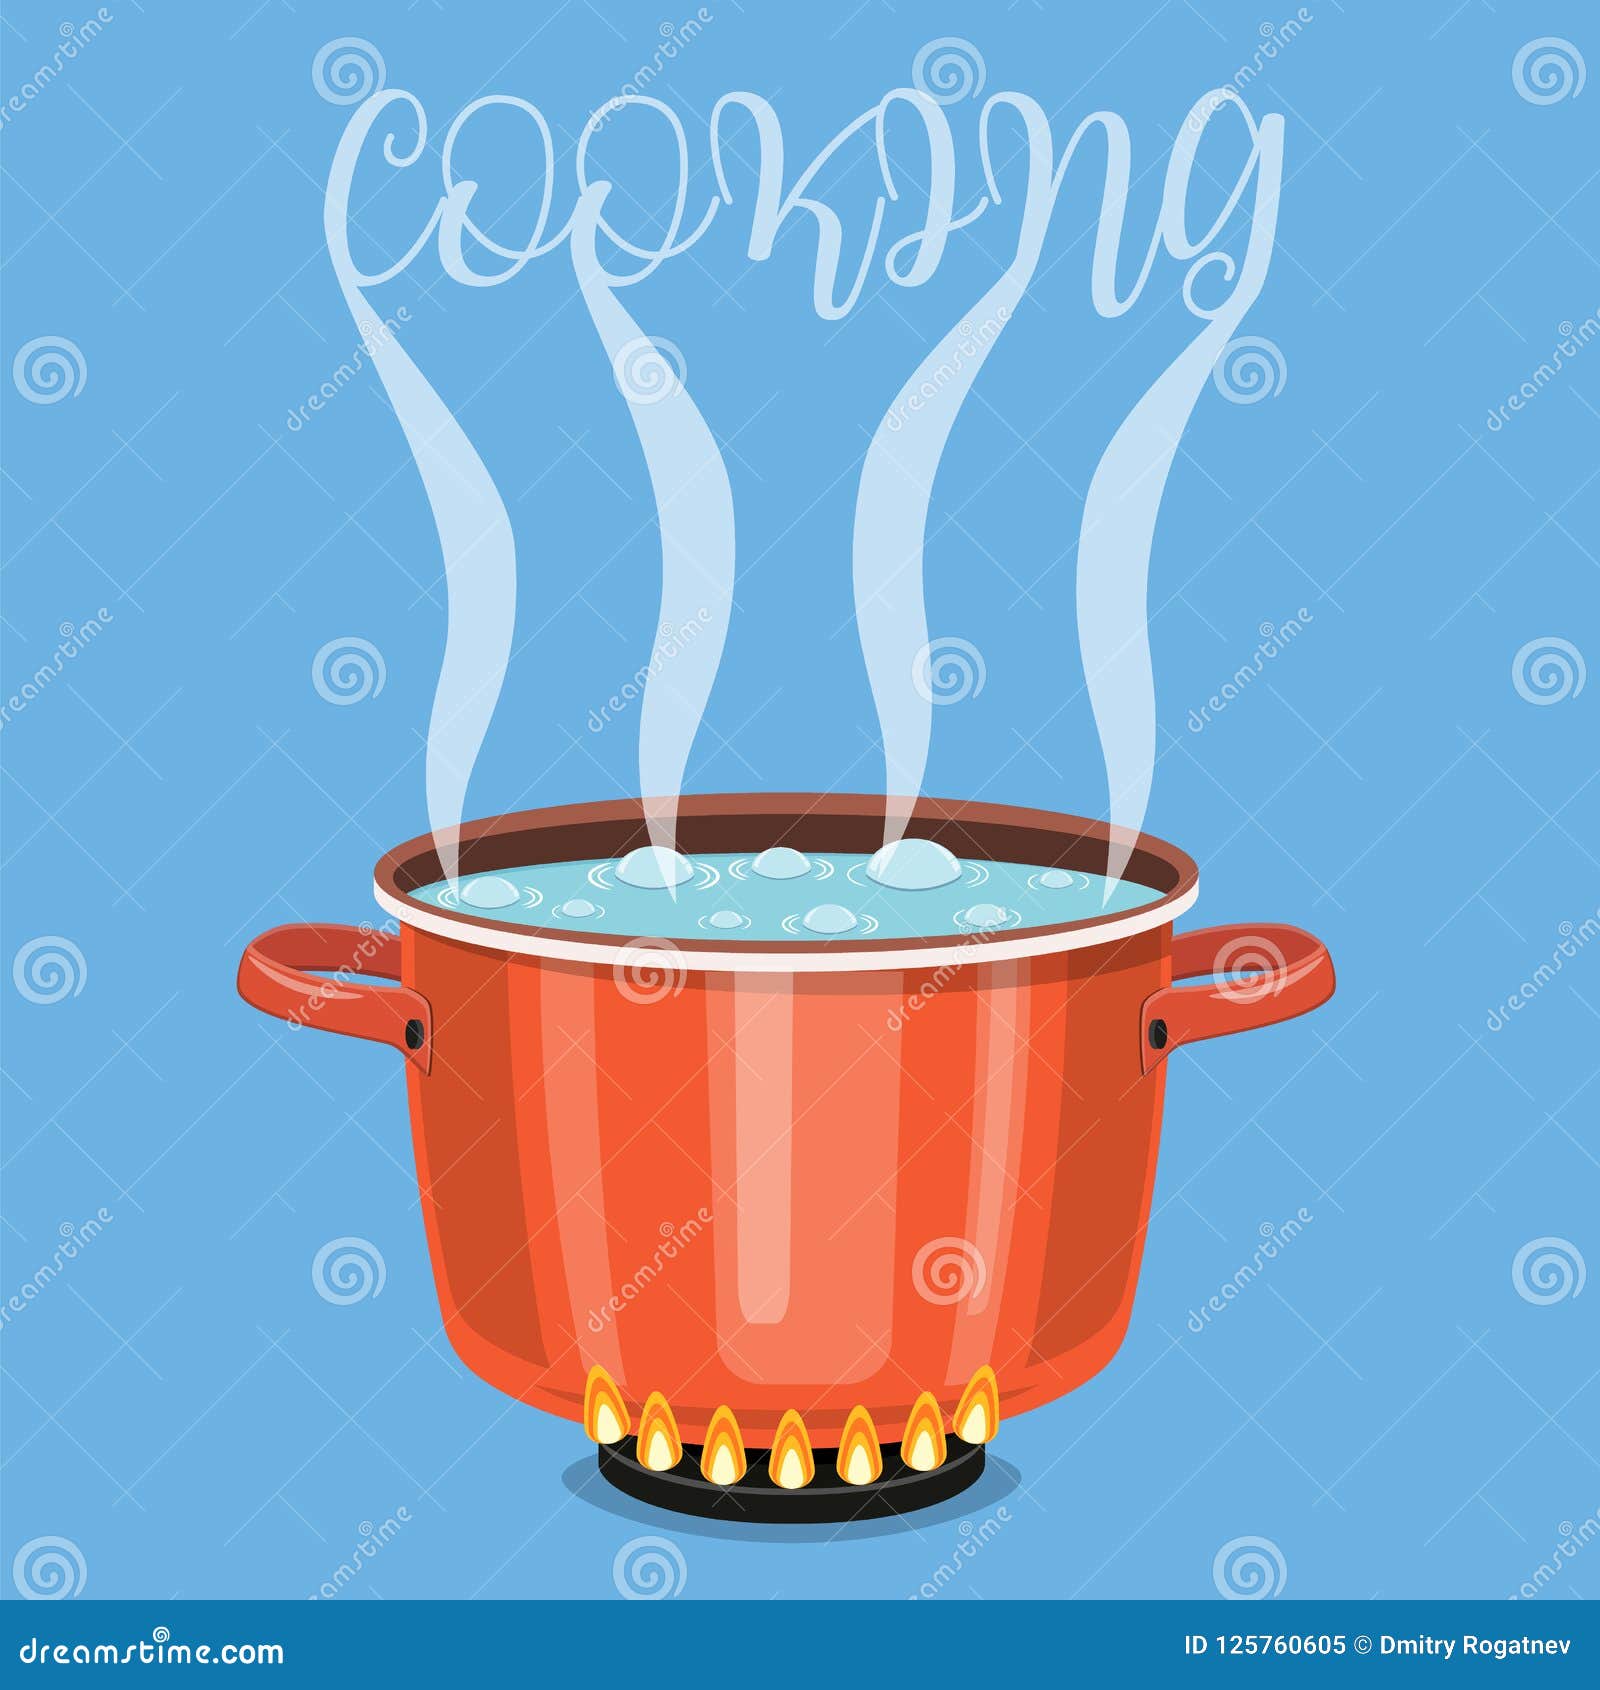 https://thumbs.dreamstime.com/z/boiling-water-pan-boiling-water-pan-cooking-pot-stove-water-steam-vector-illustration-flat-style-125760605.jpg